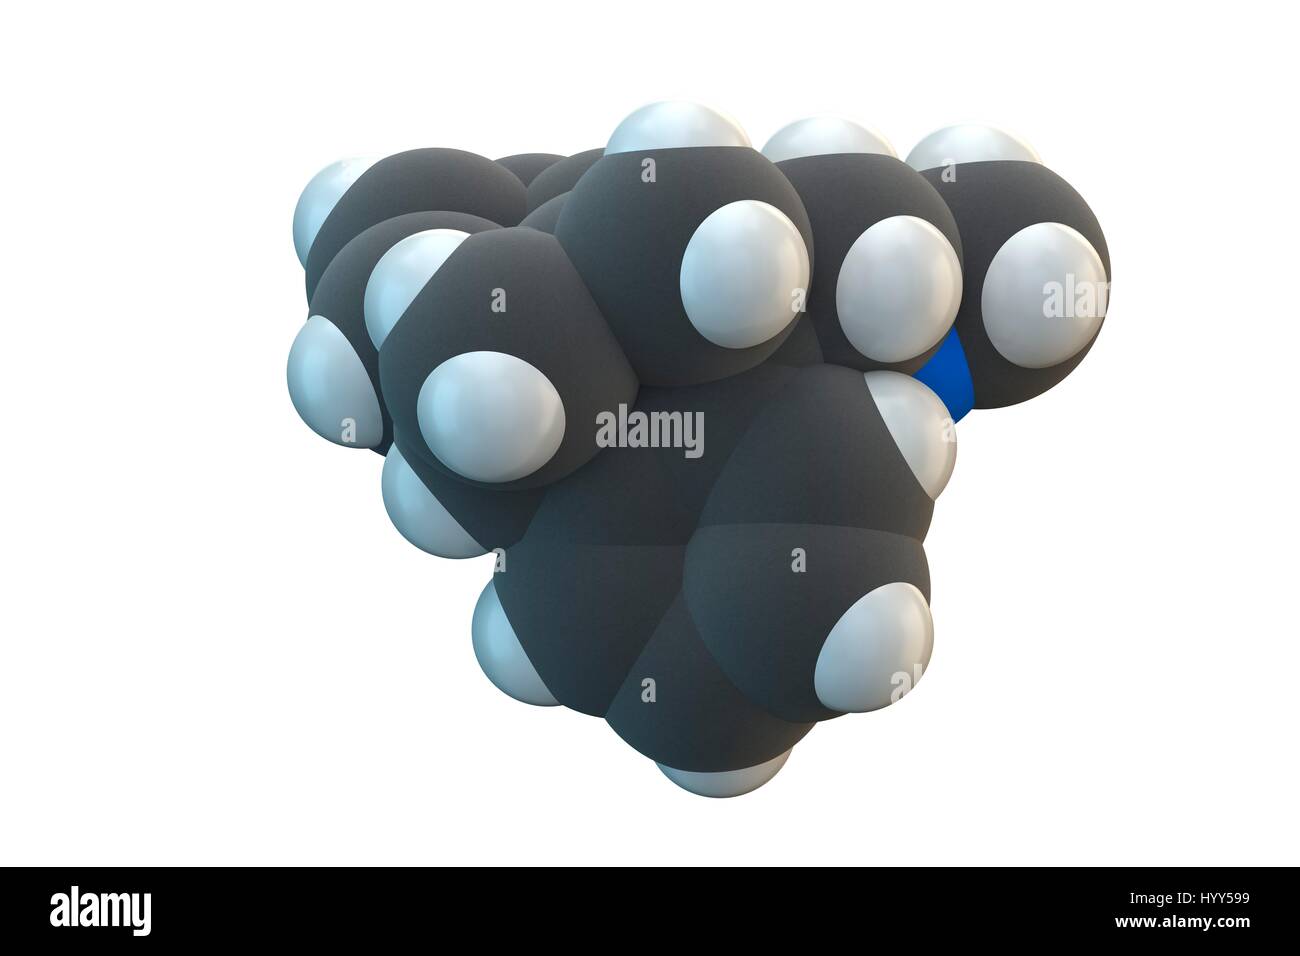 Benzoctamine drug molecule. It has sedative and anxiolytic properties. Chemical formula is C18H19N. Atoms are represented as spheres: carbon (grey), hydrogen (white), nitrogen (blue). Illustration. Stock Photo